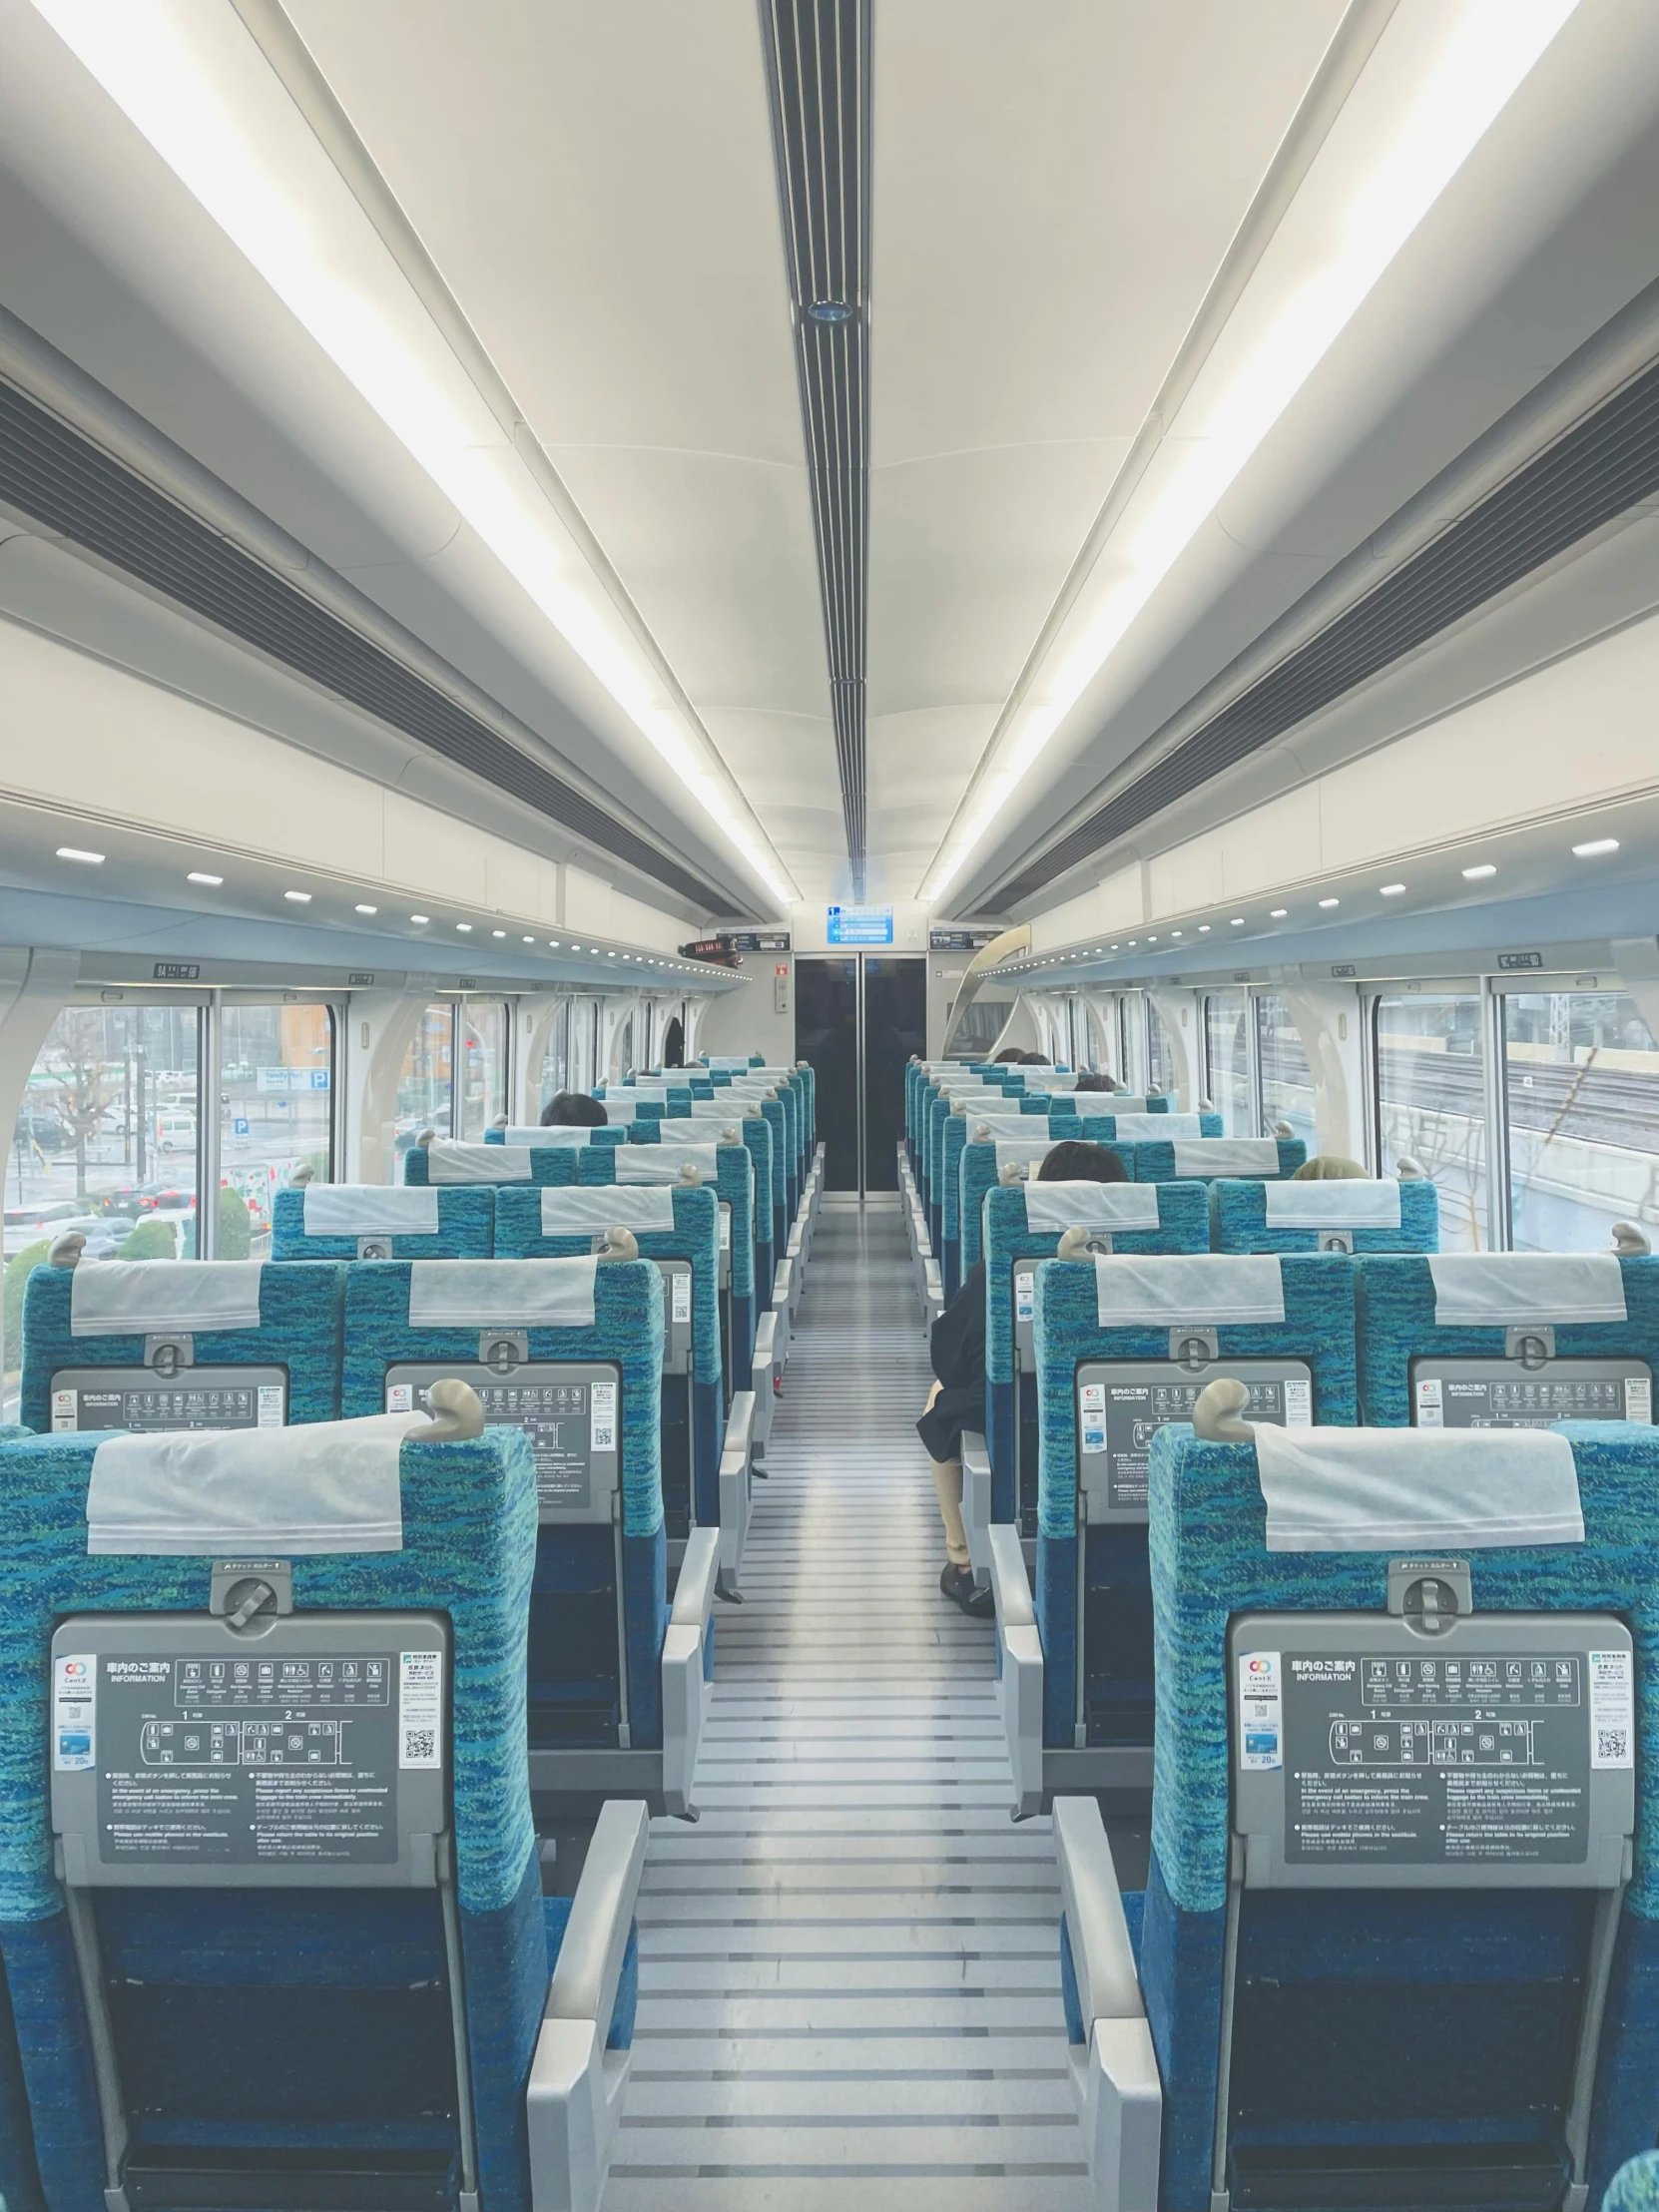 the view of a train car with lots of seats and a ceiling light